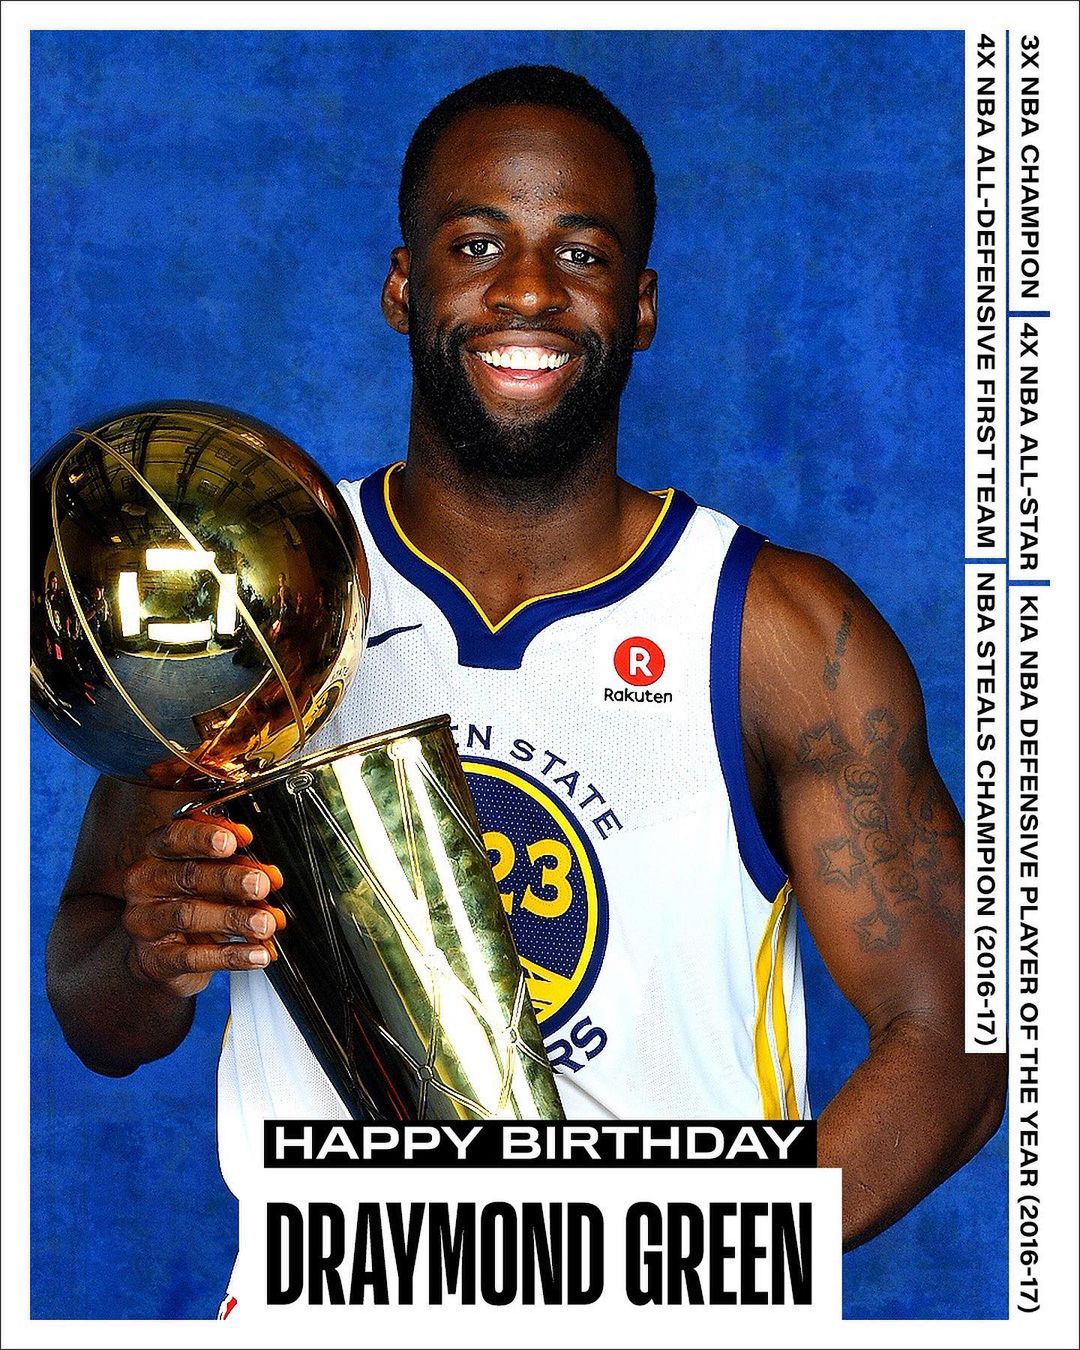 Join us in wishing @money23green of the @warriors a HAPPY 32nd BIRTHDAY! #NBABDA...